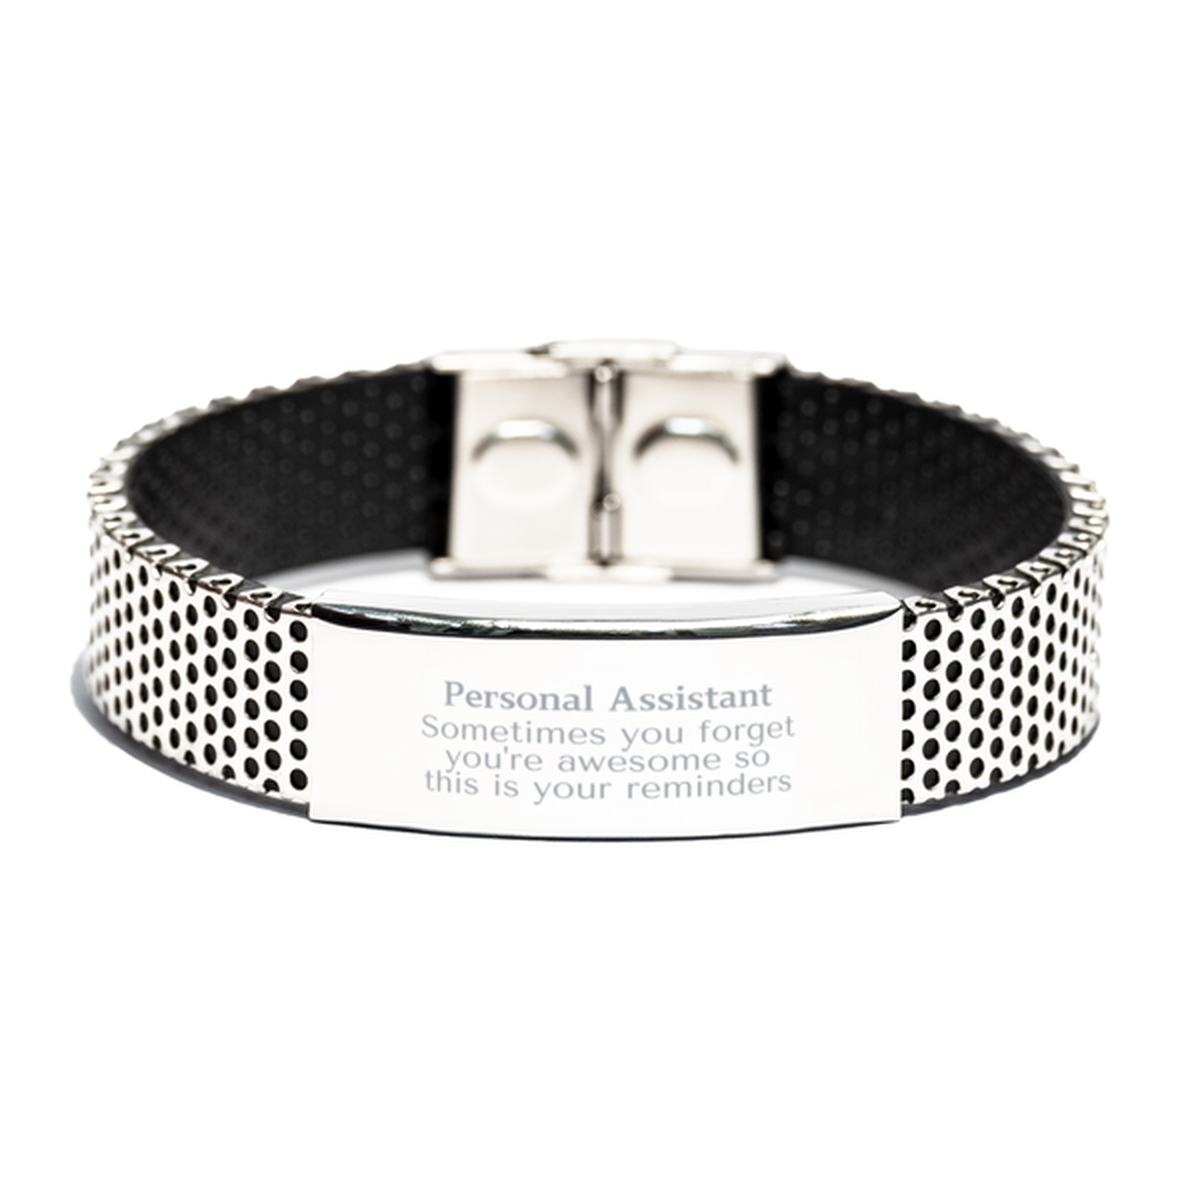 Sentimental Personal Assistant Stainless Steel Bracelet, Personal Assistant Sometimes you forget you're awesome so this is your reminders, Graduation Christmas Birthday Gifts for Personal Assistant, Men, Women, Coworkers